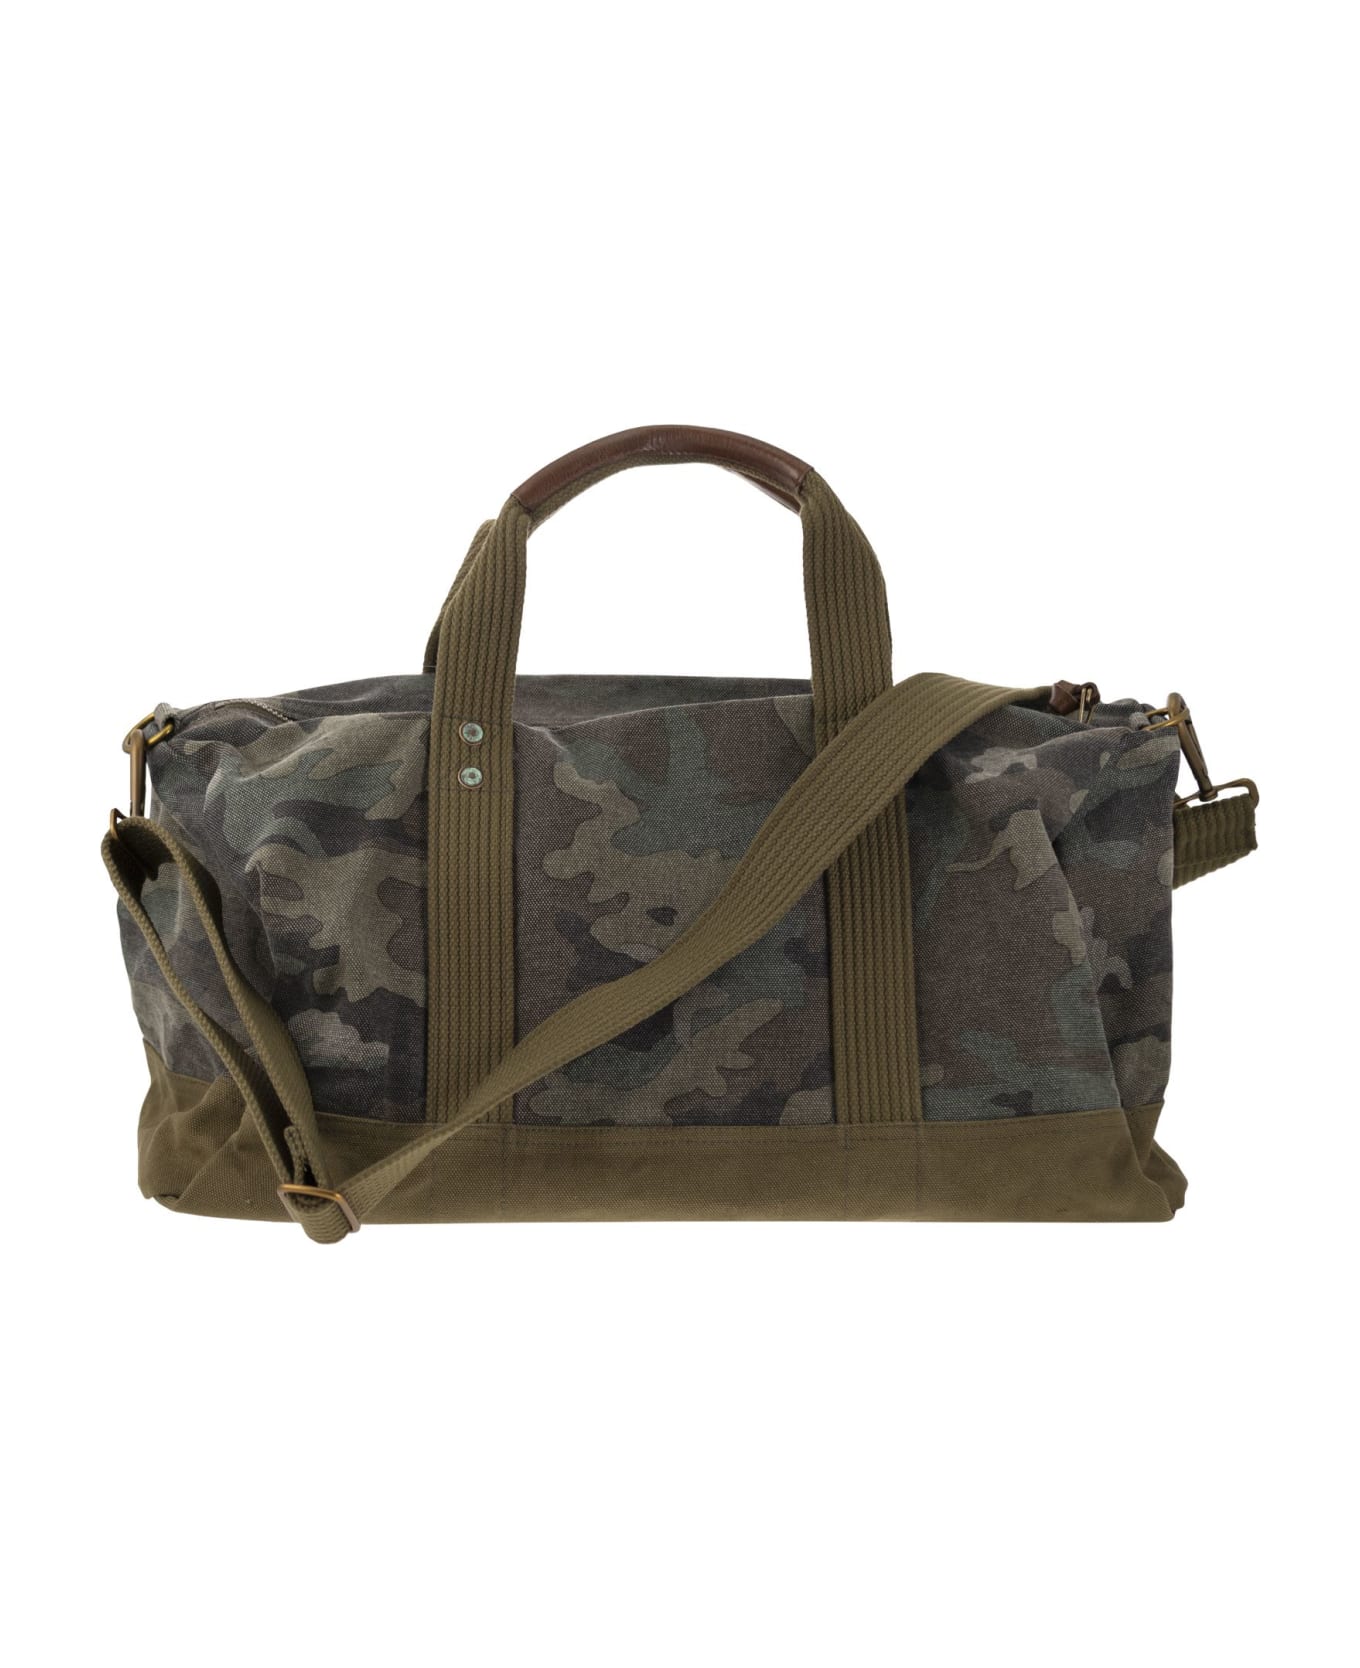 Polo Ralph Lauren Camouflage Canvas Duffle Bag With Tiger - Camo